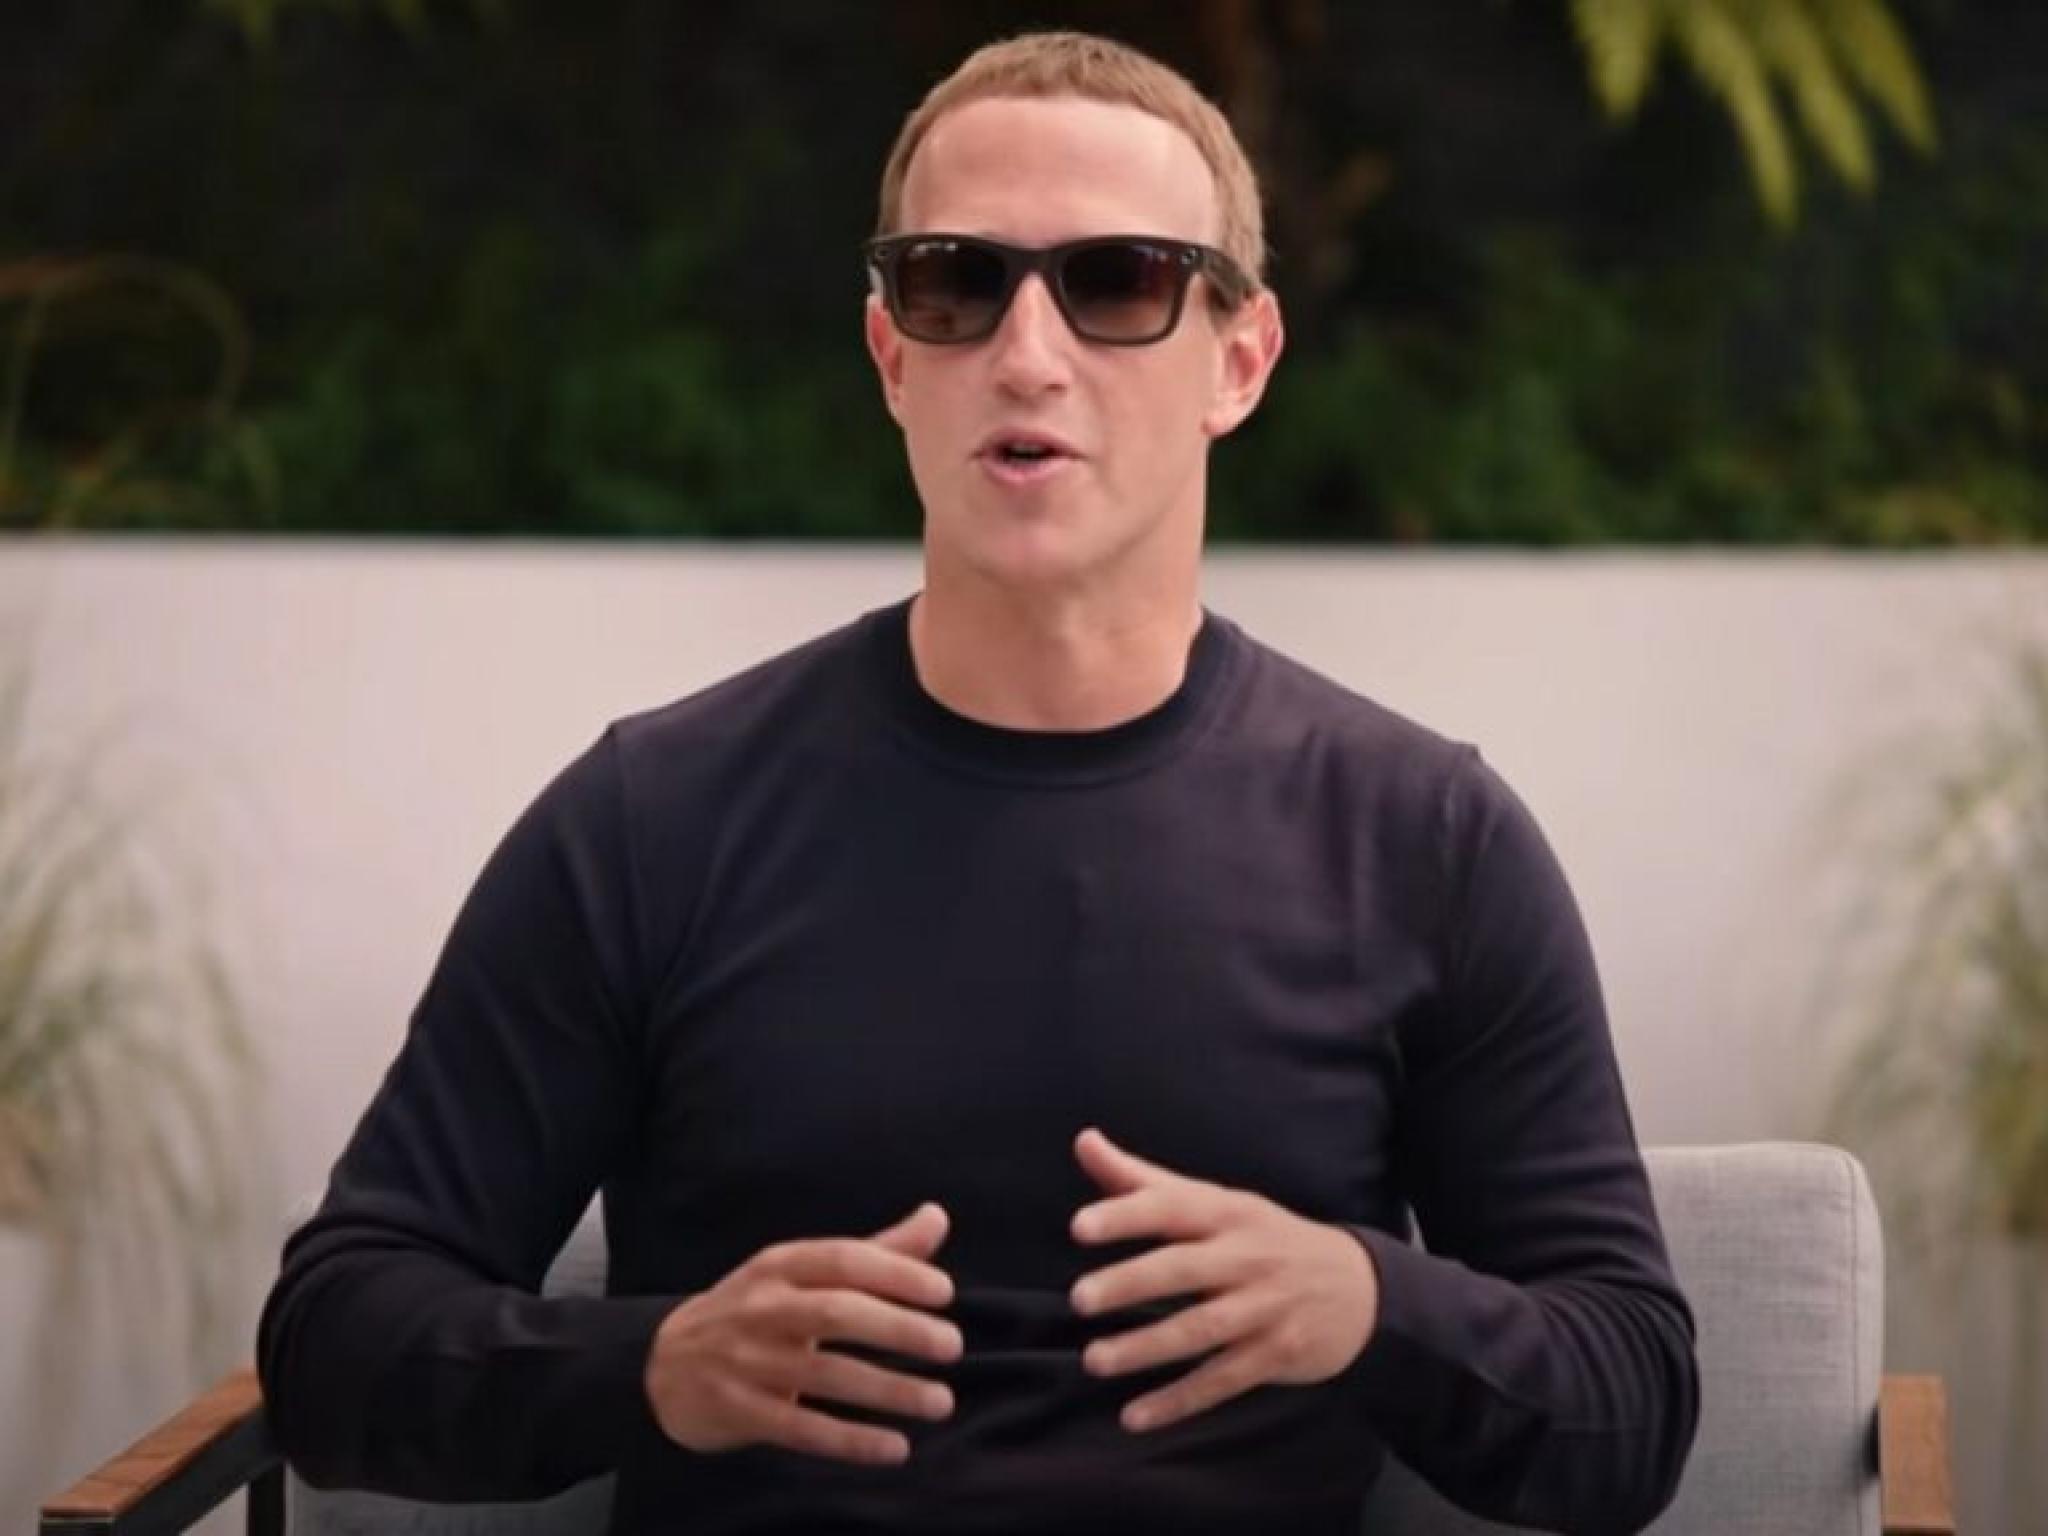  mark-zuckerberg-shares-videos-shot-using-ray-ban-meta-glasses-while-wakeboarding-didnt-even-fry-my-glasses 